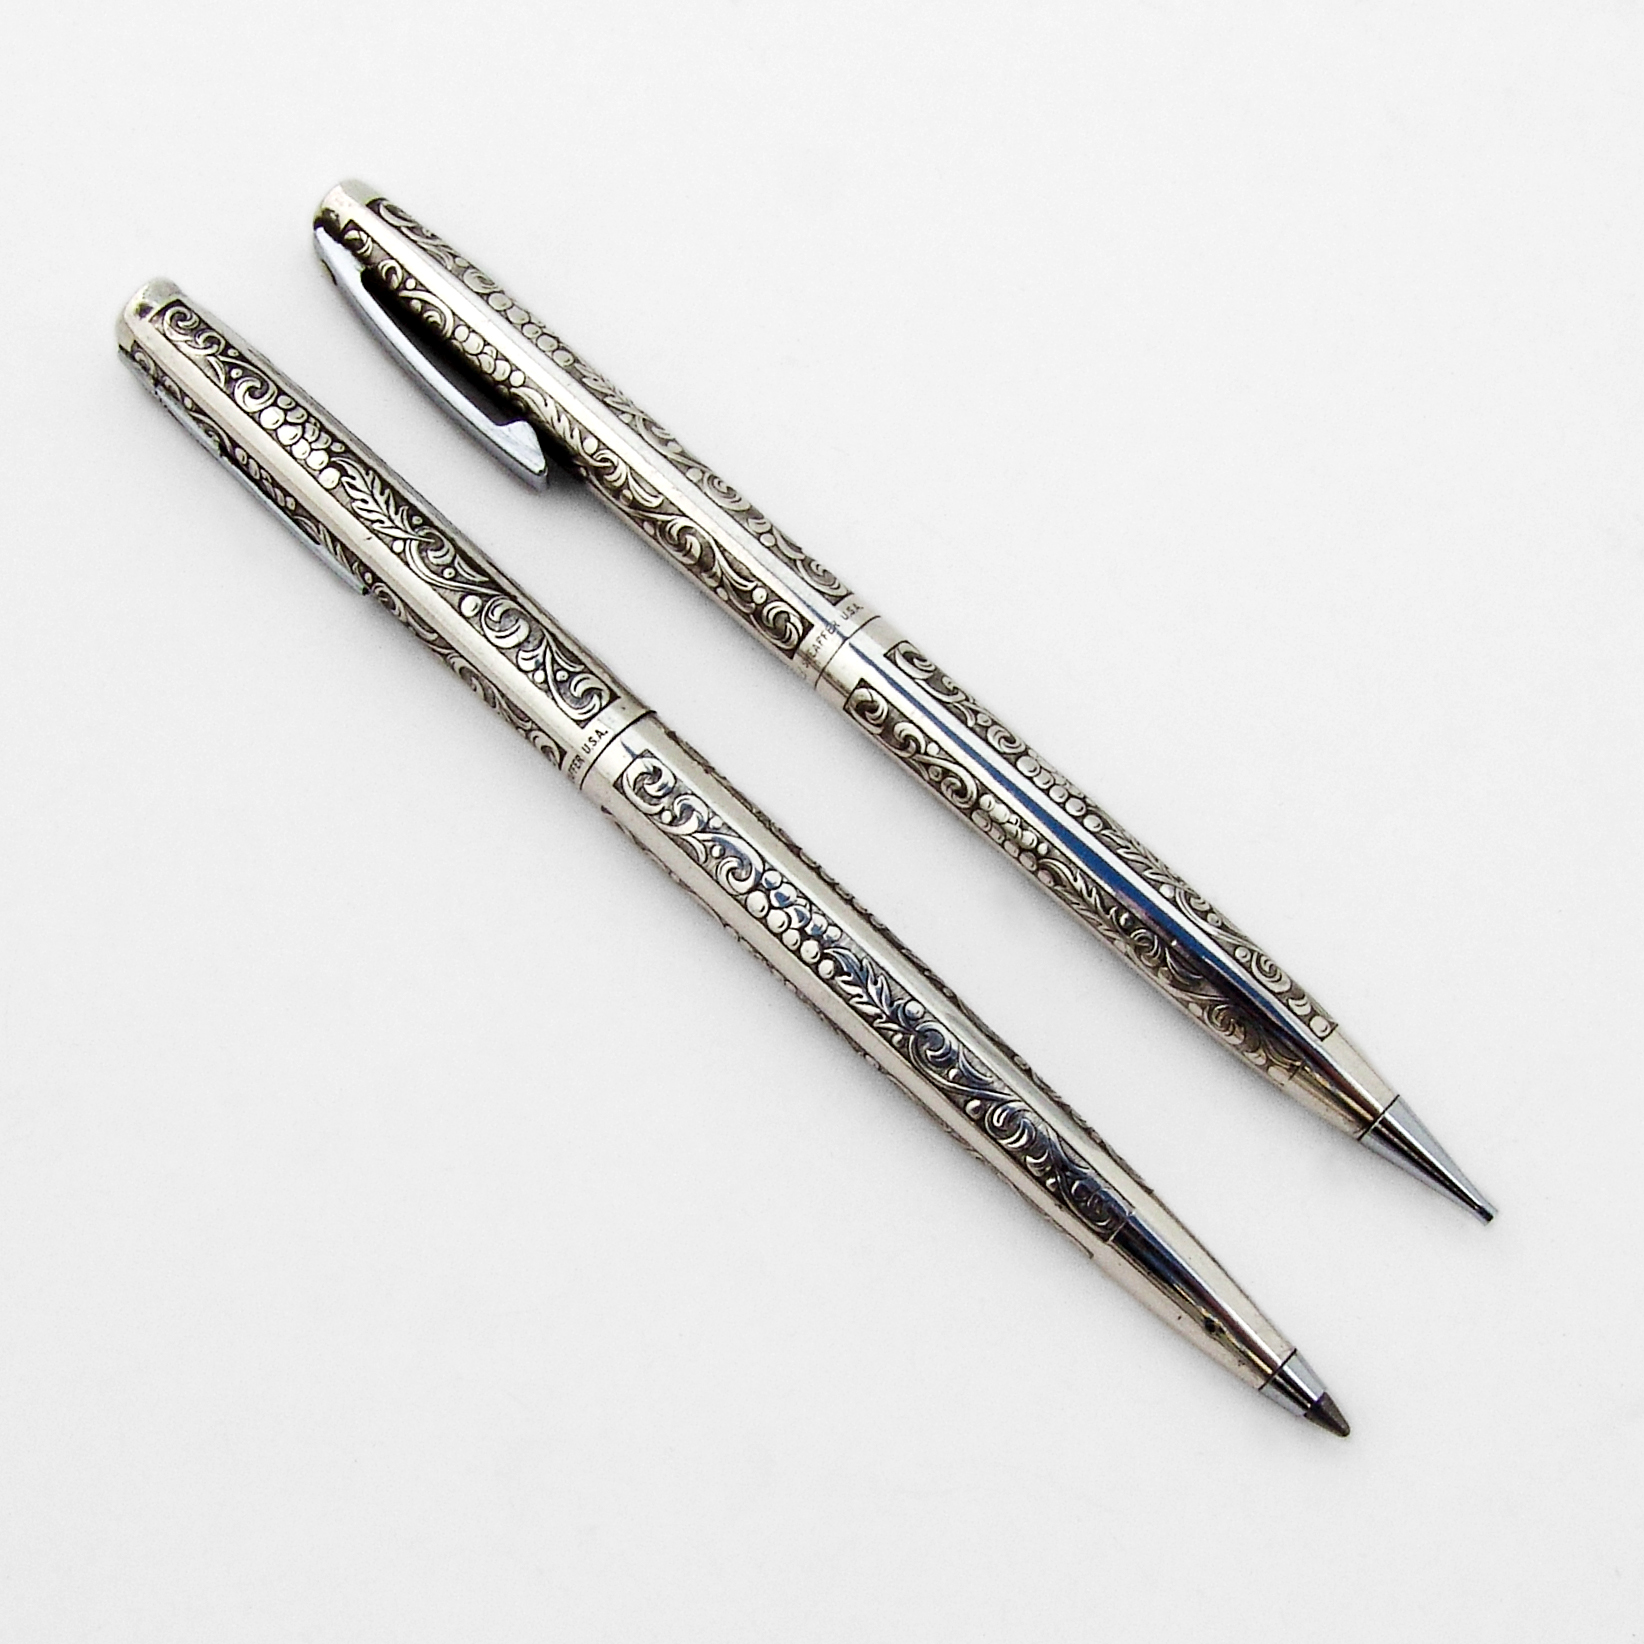 GORGEOUS HIGH QUALITY SLIM CROSS POLISHED SILVER PEN AND PENCIL SET